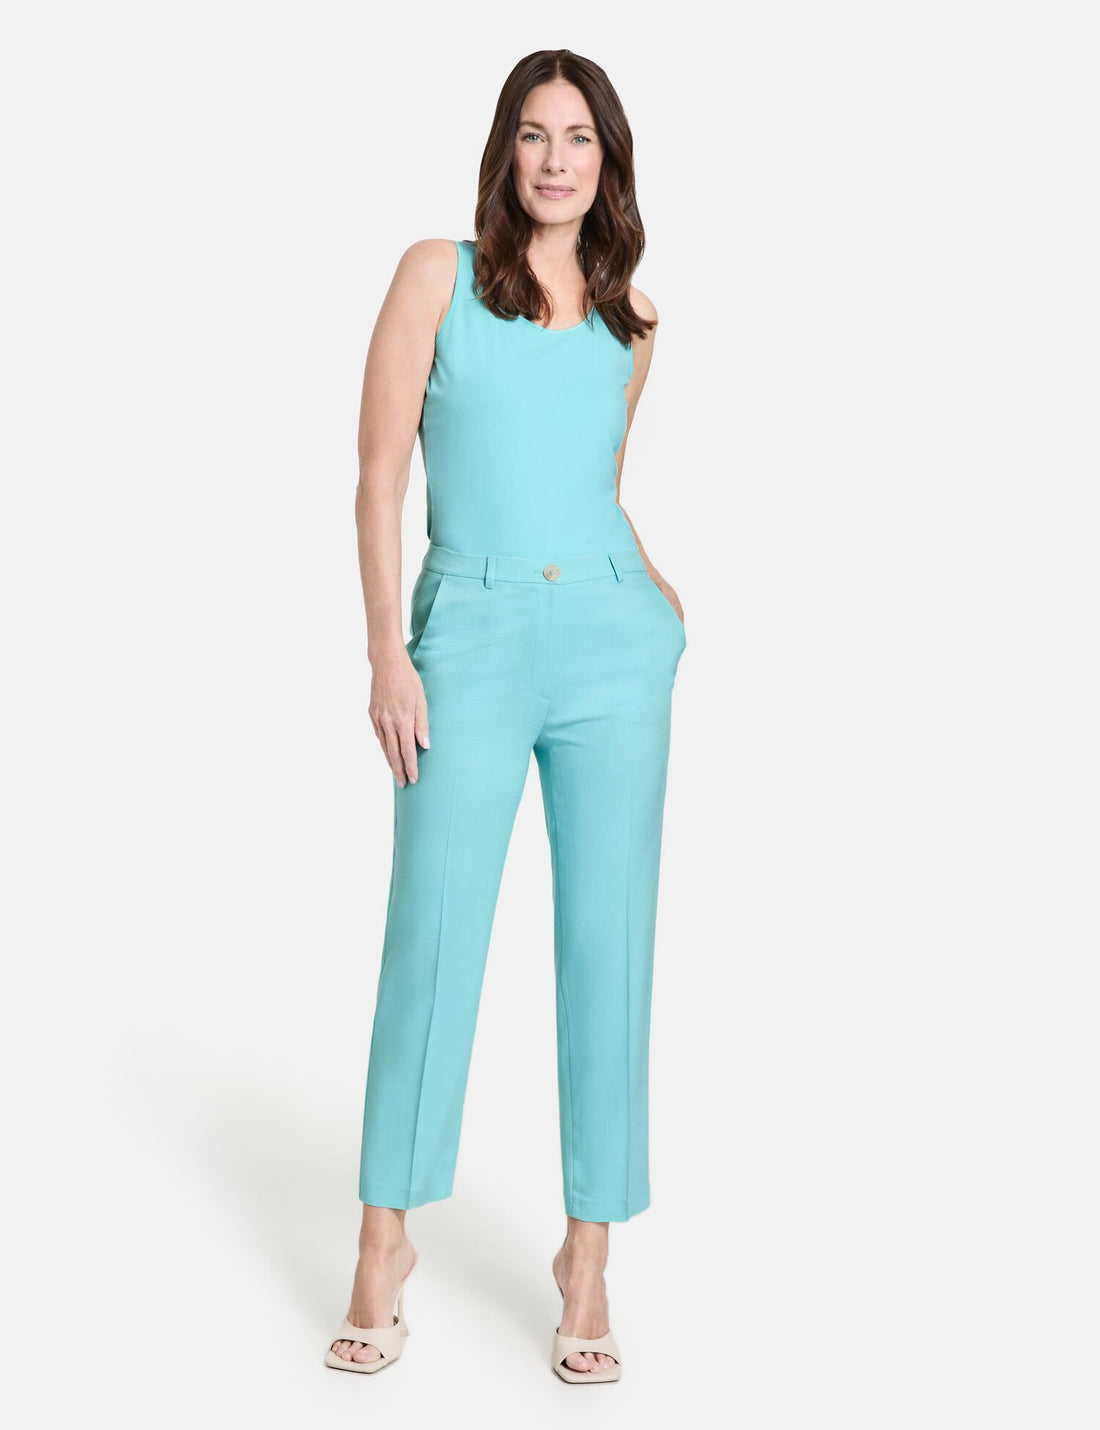 Simple 7/8-Length Trousers With Pressed Pleats_320044-31279_80367_01